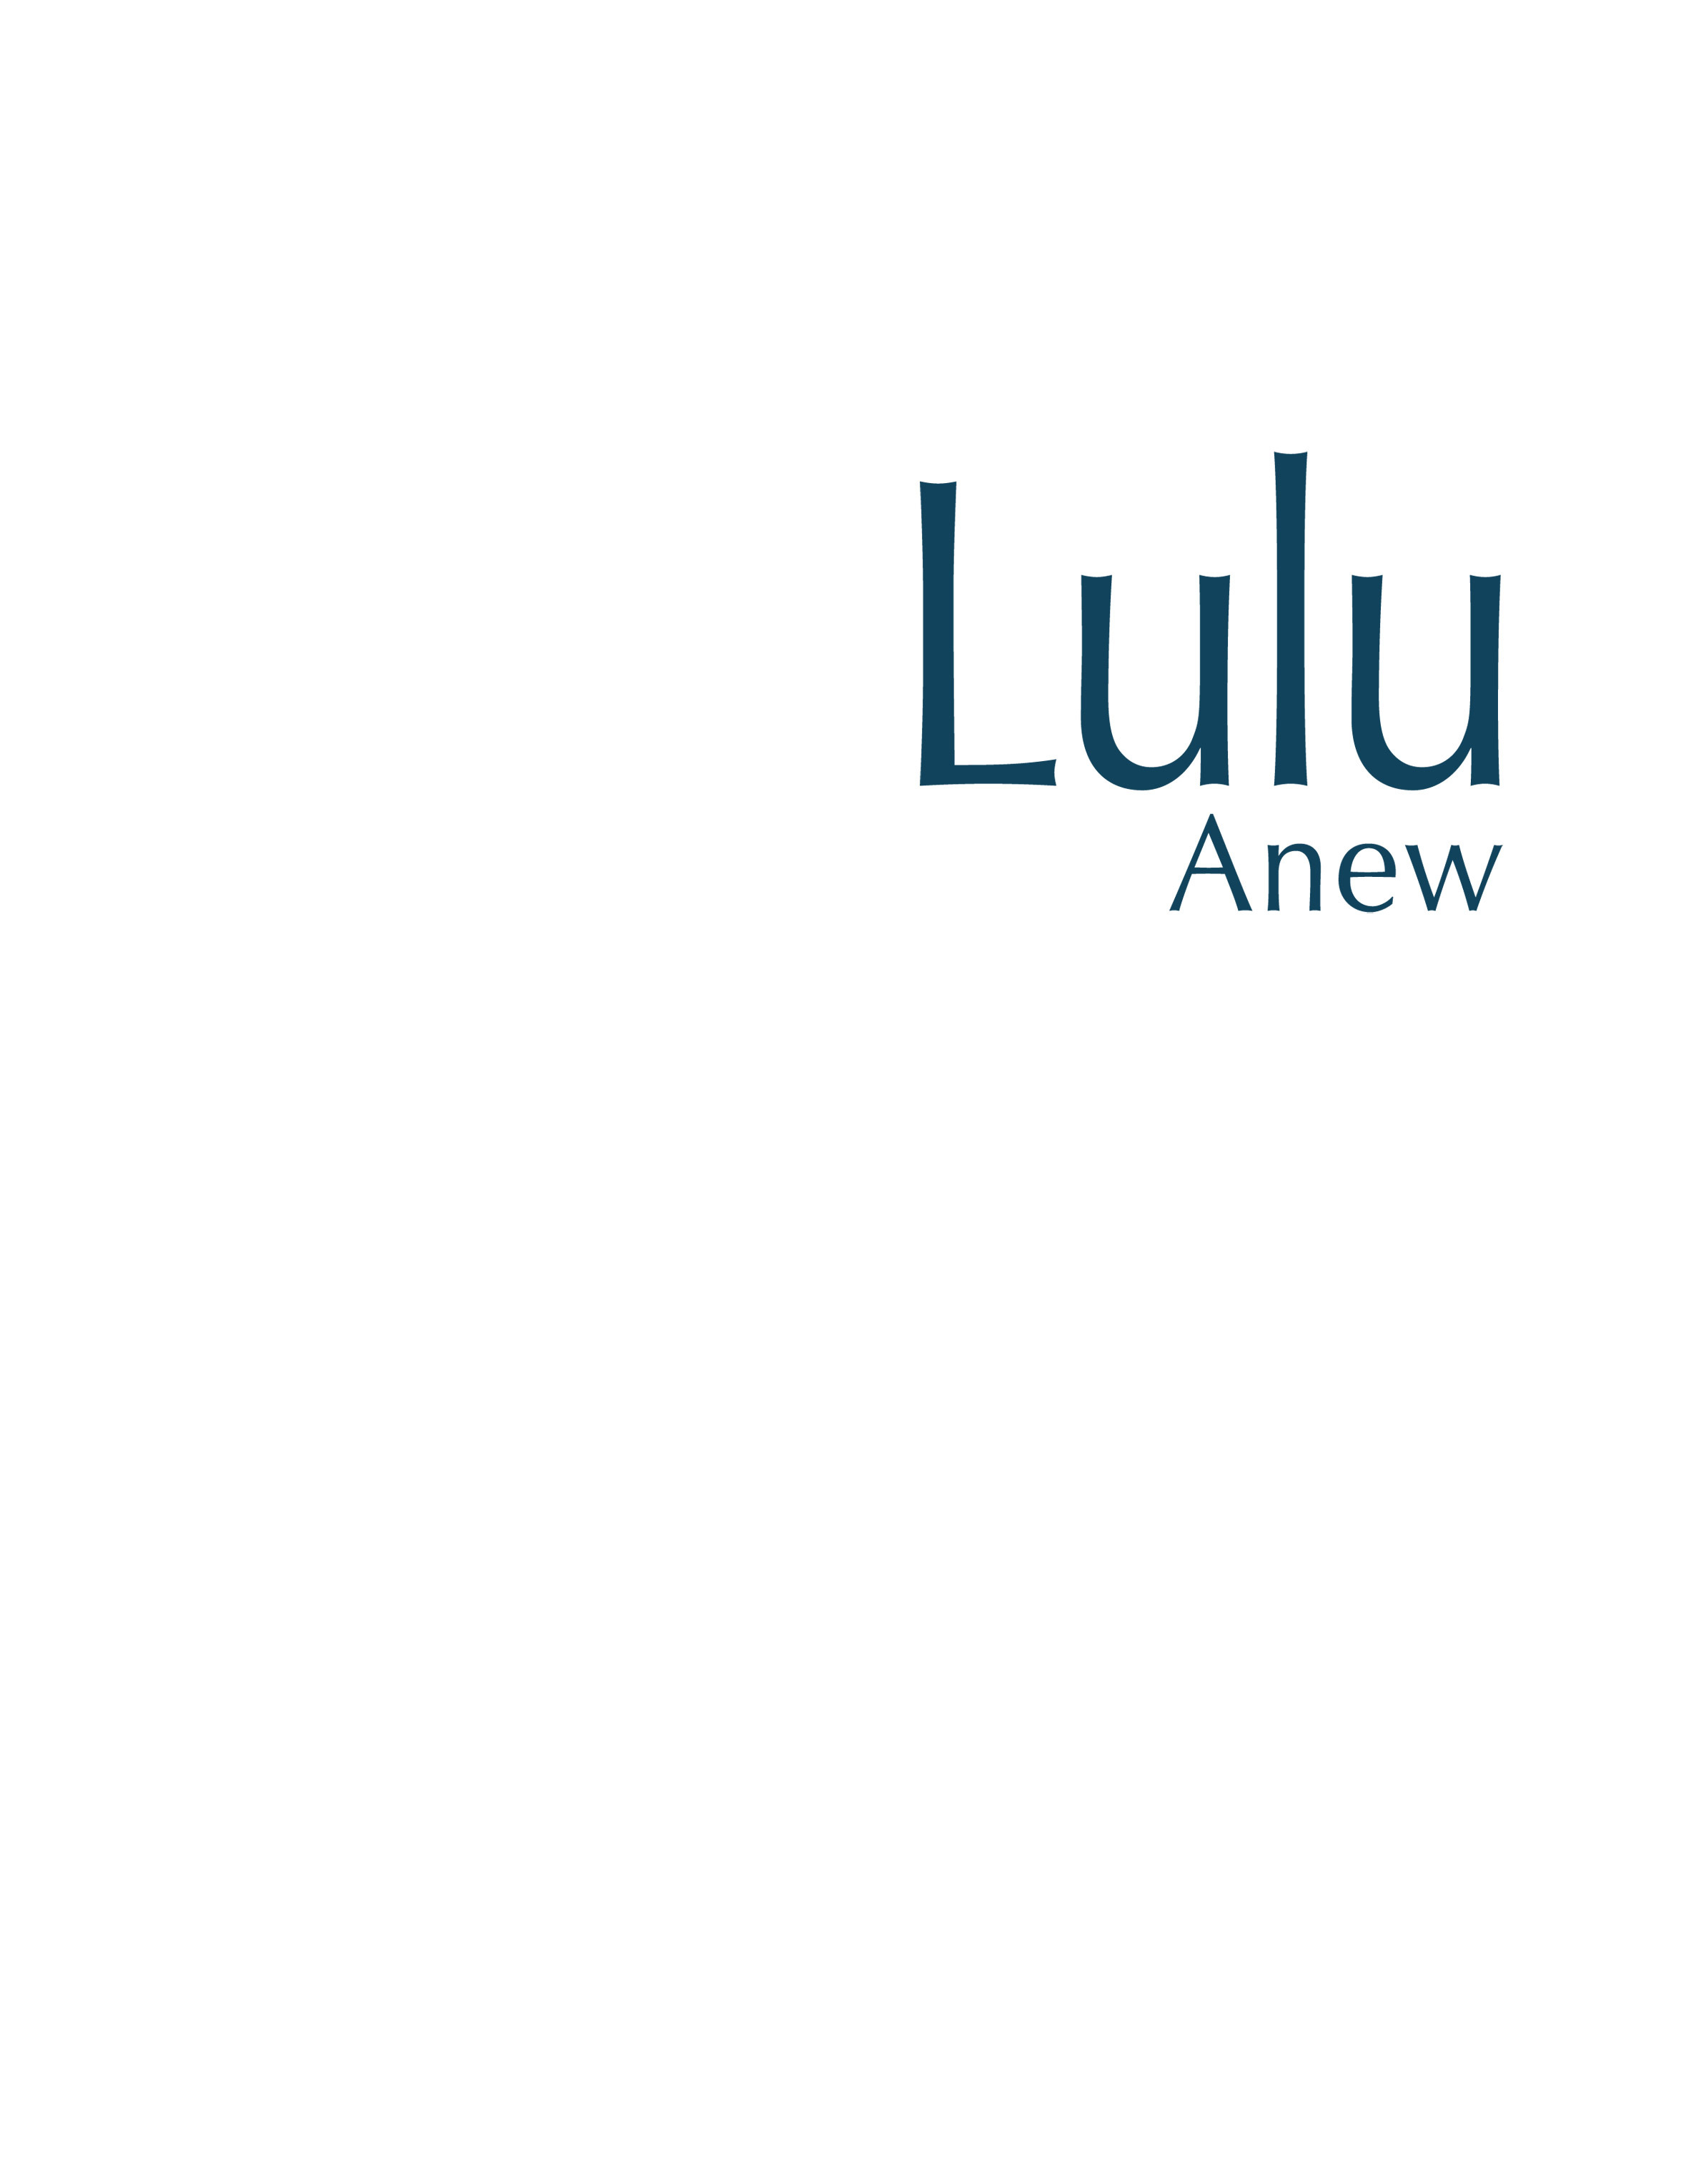 Read online Lulu Anew comic -  Issue # TPB - 2